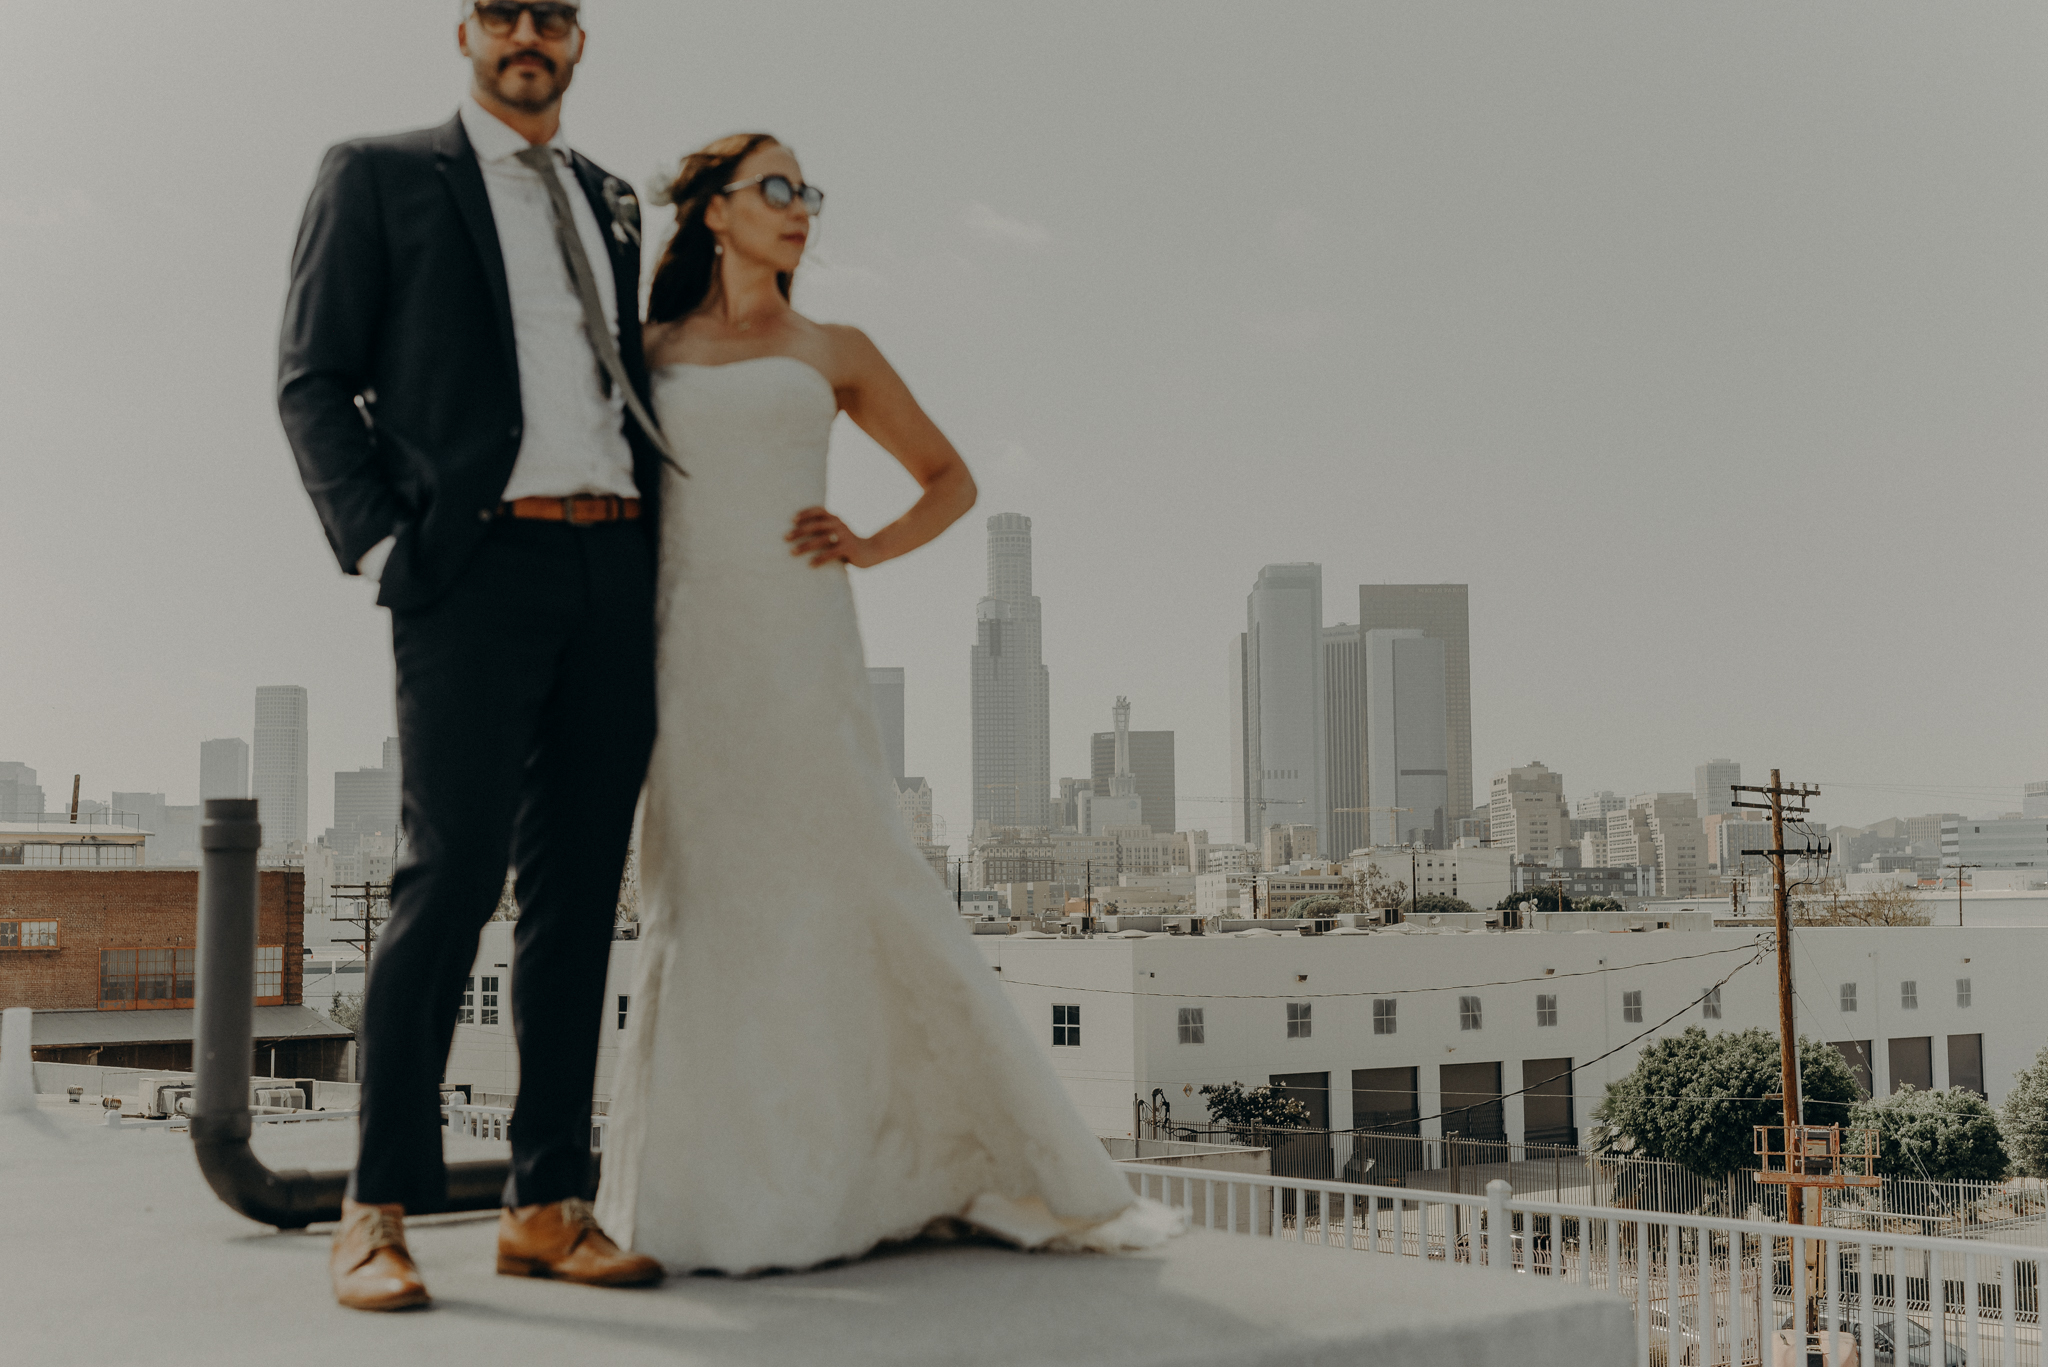 The Unique Space Wedding Photographer - Los Angeles Wedding Photography - IsaiahAndTaylor.com-060.jpg